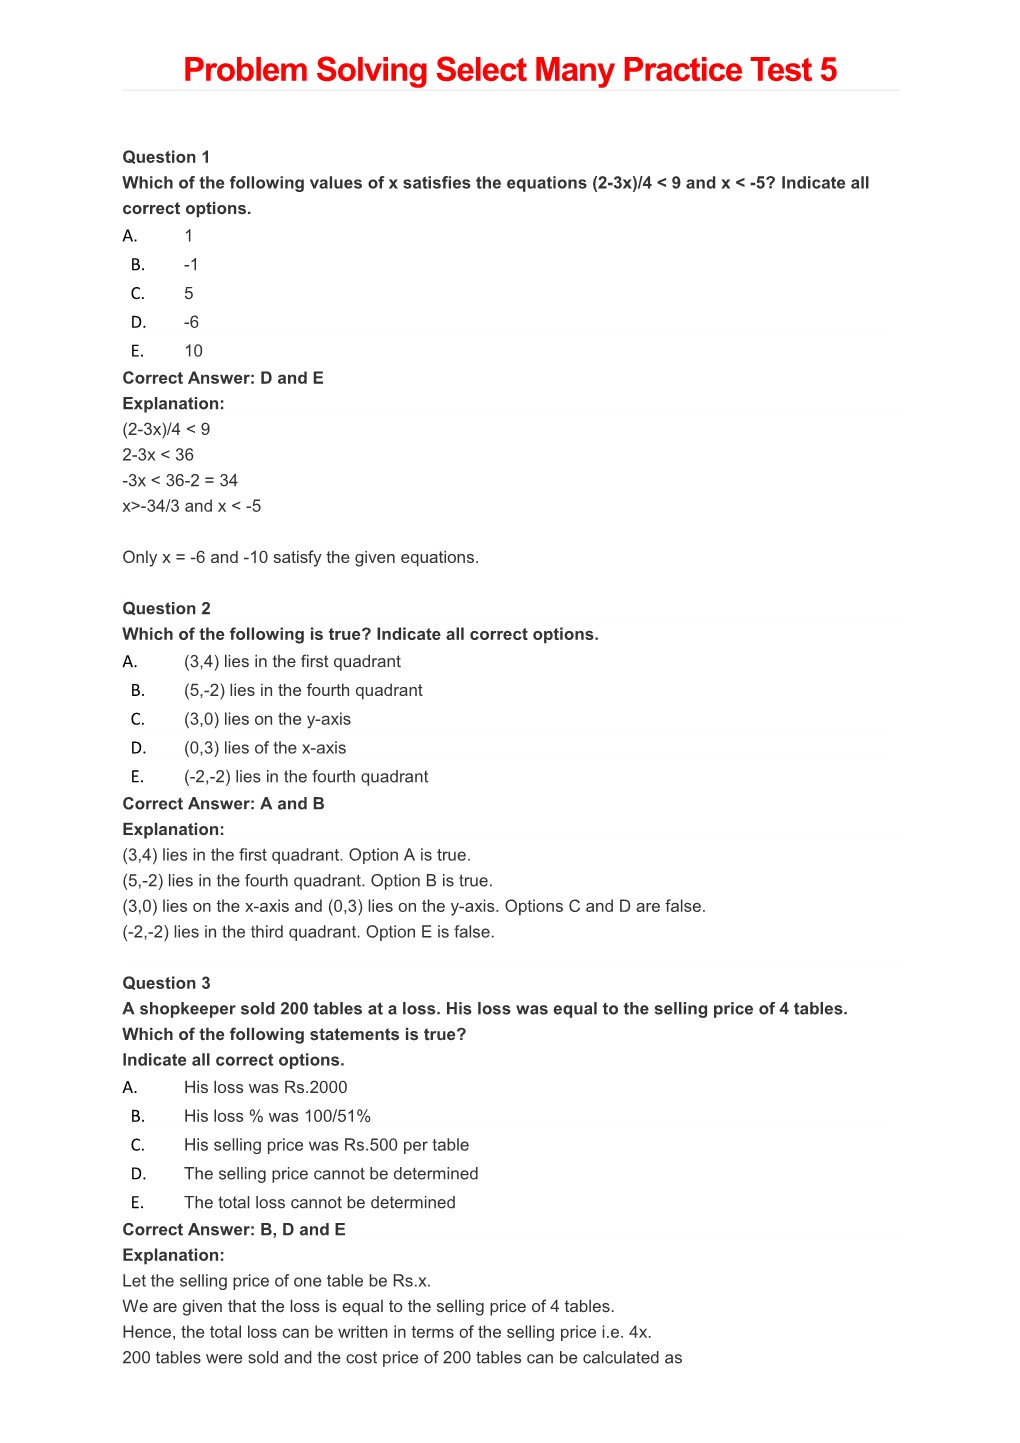 Problem Solving Select Many Practice Test 5